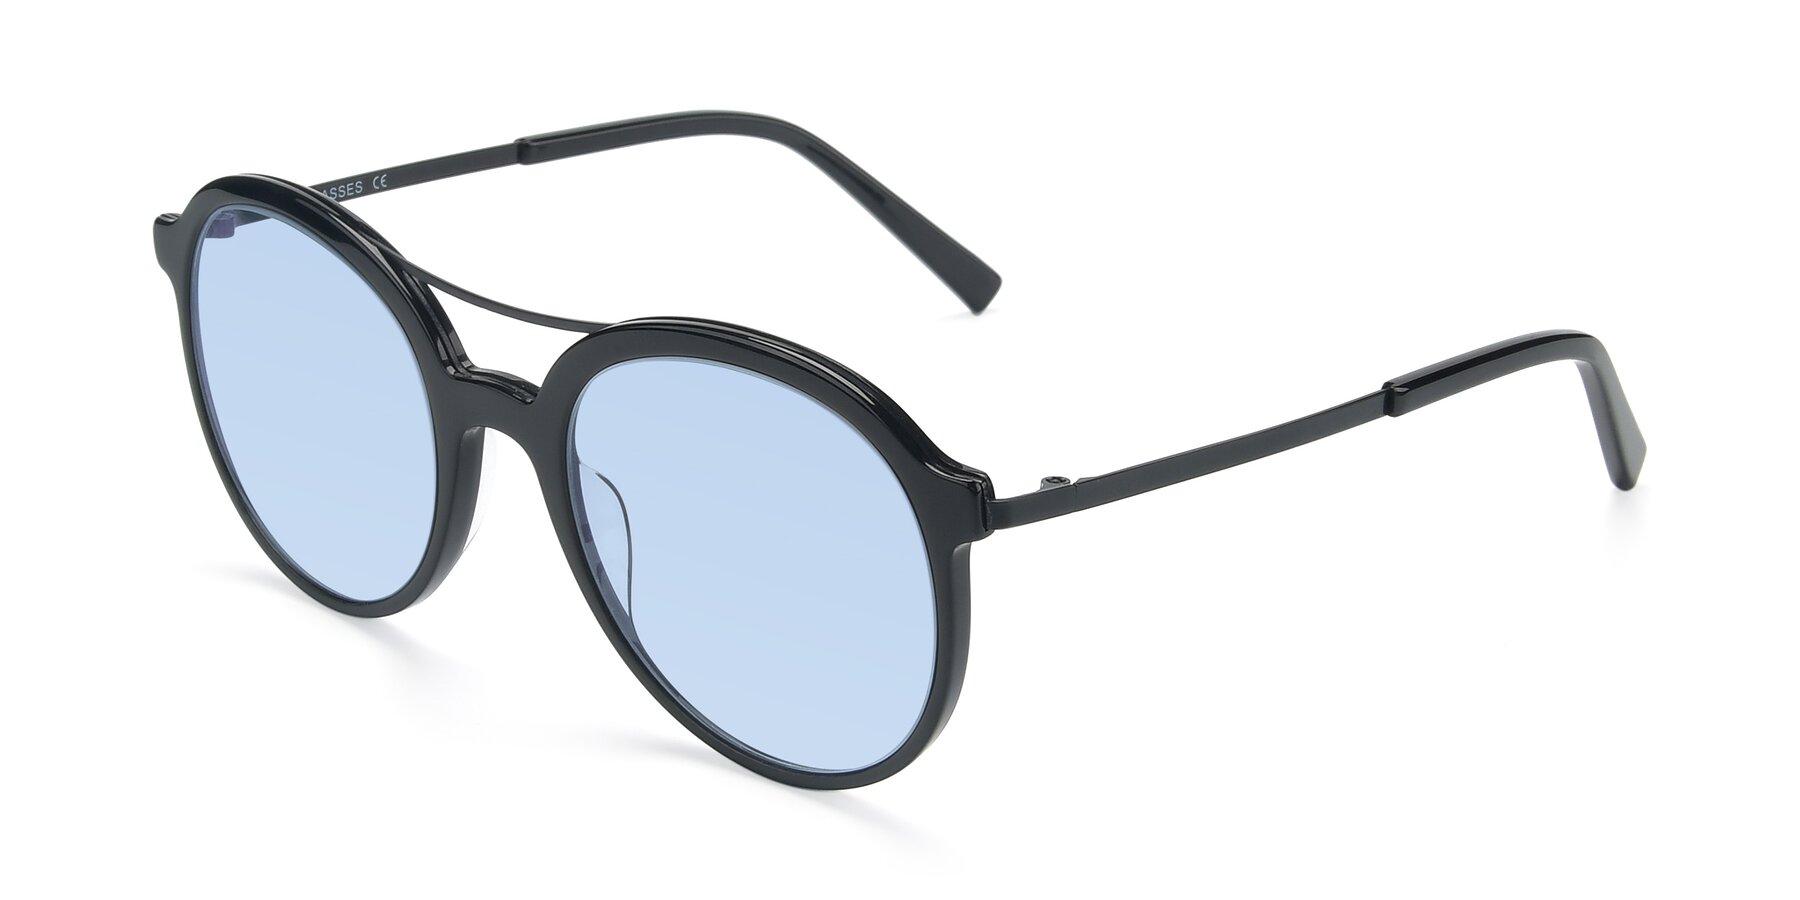 Angle of 17268 in Black with Light Blue Tinted Lenses